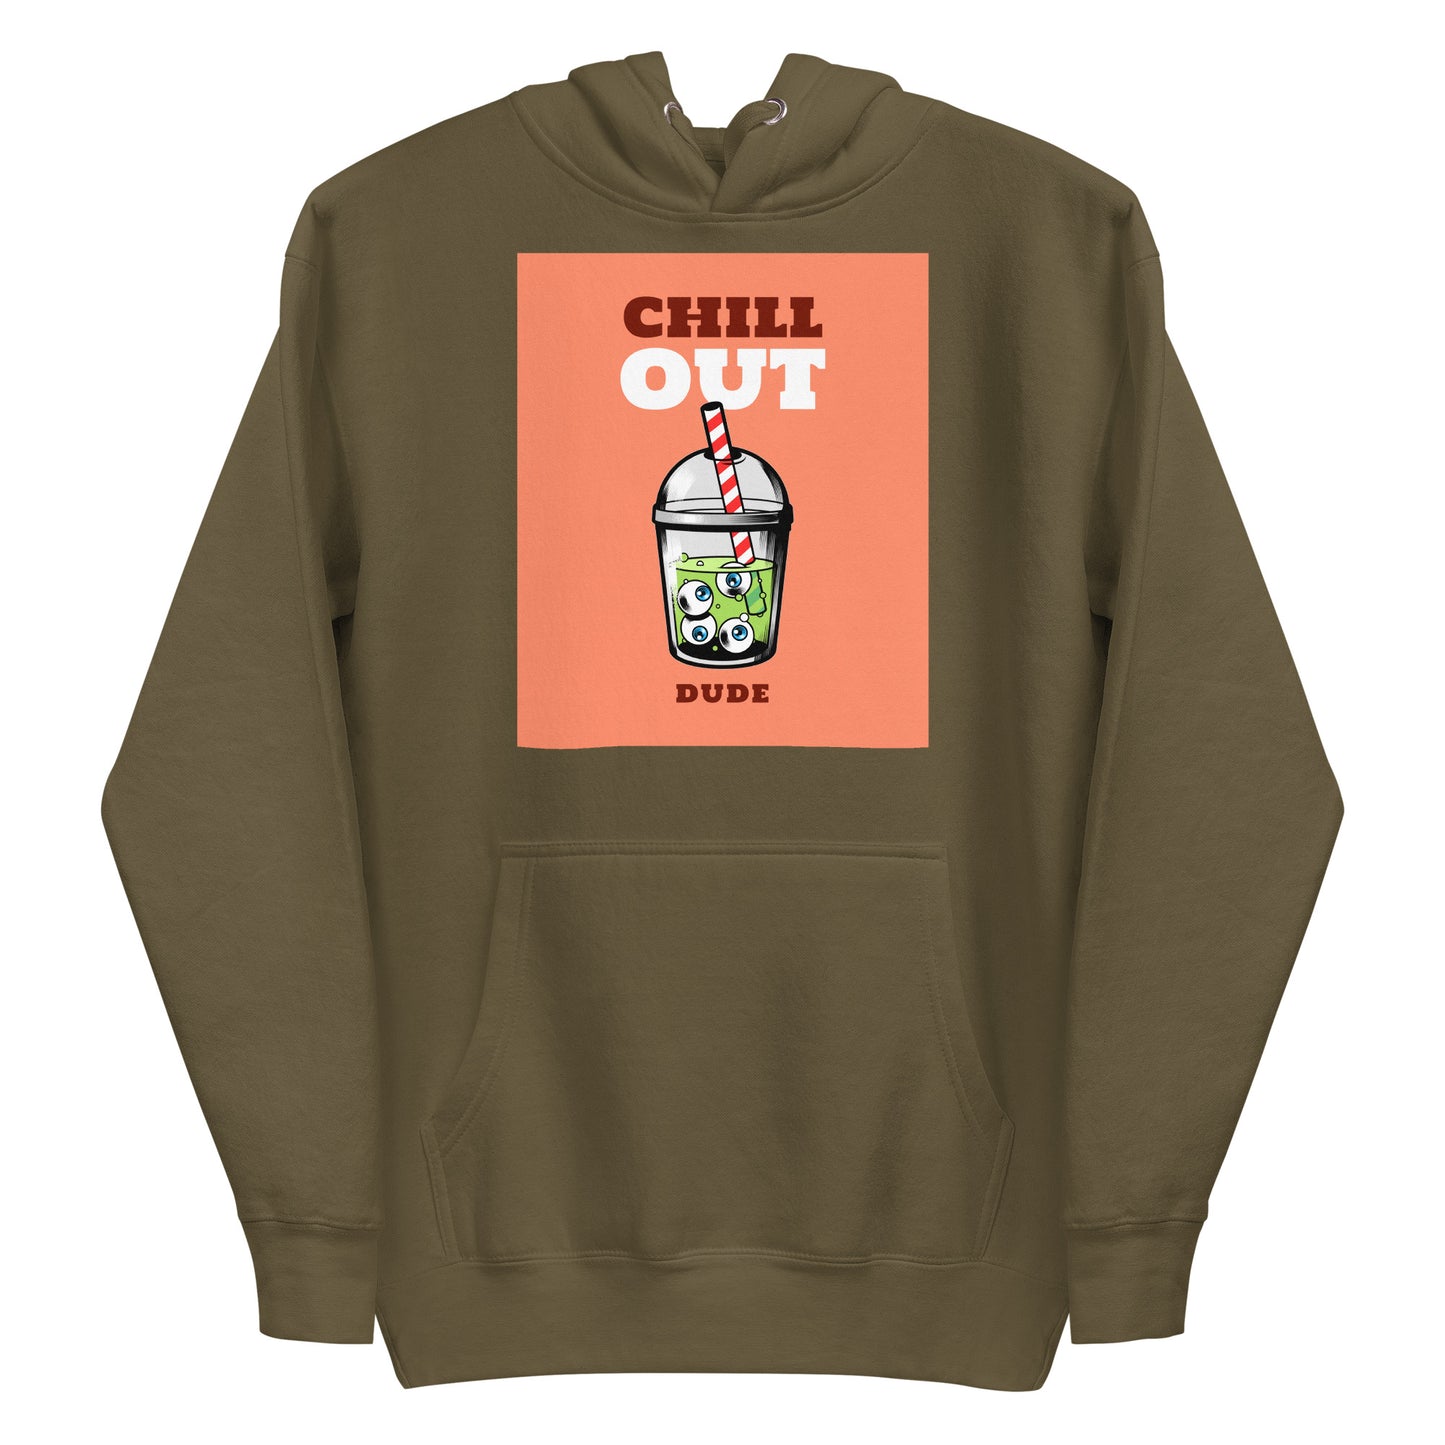 CHILL OUT DUDE | Women's Premium Hoodie